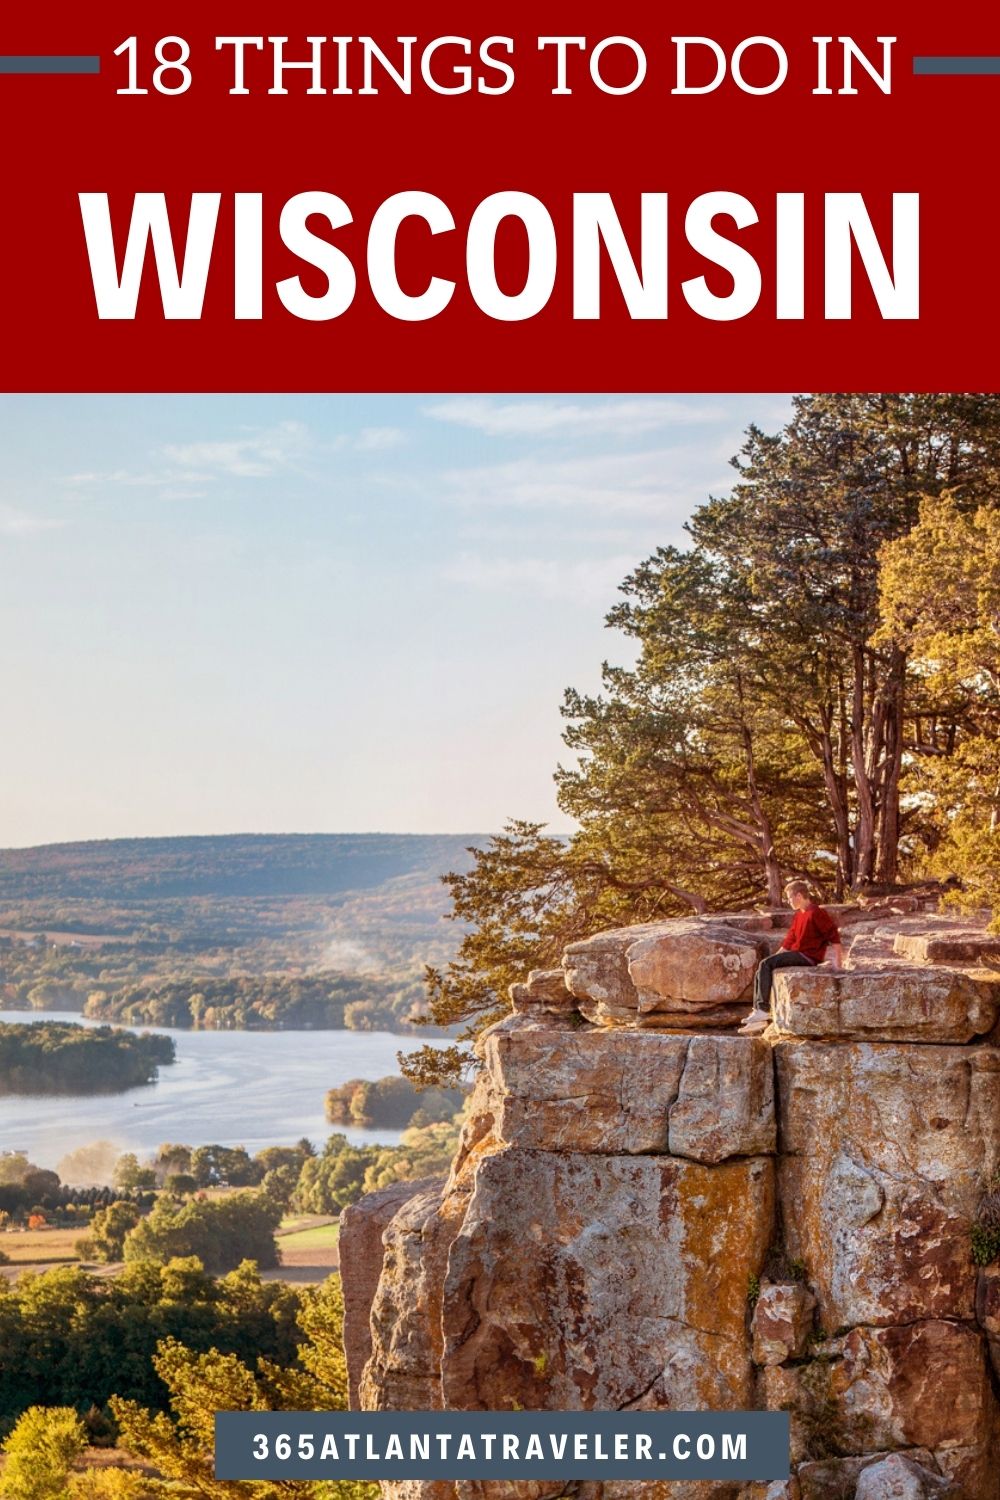 18 BEST THINGS TO DO IN WISCONSIN YOU CAN'T MISS